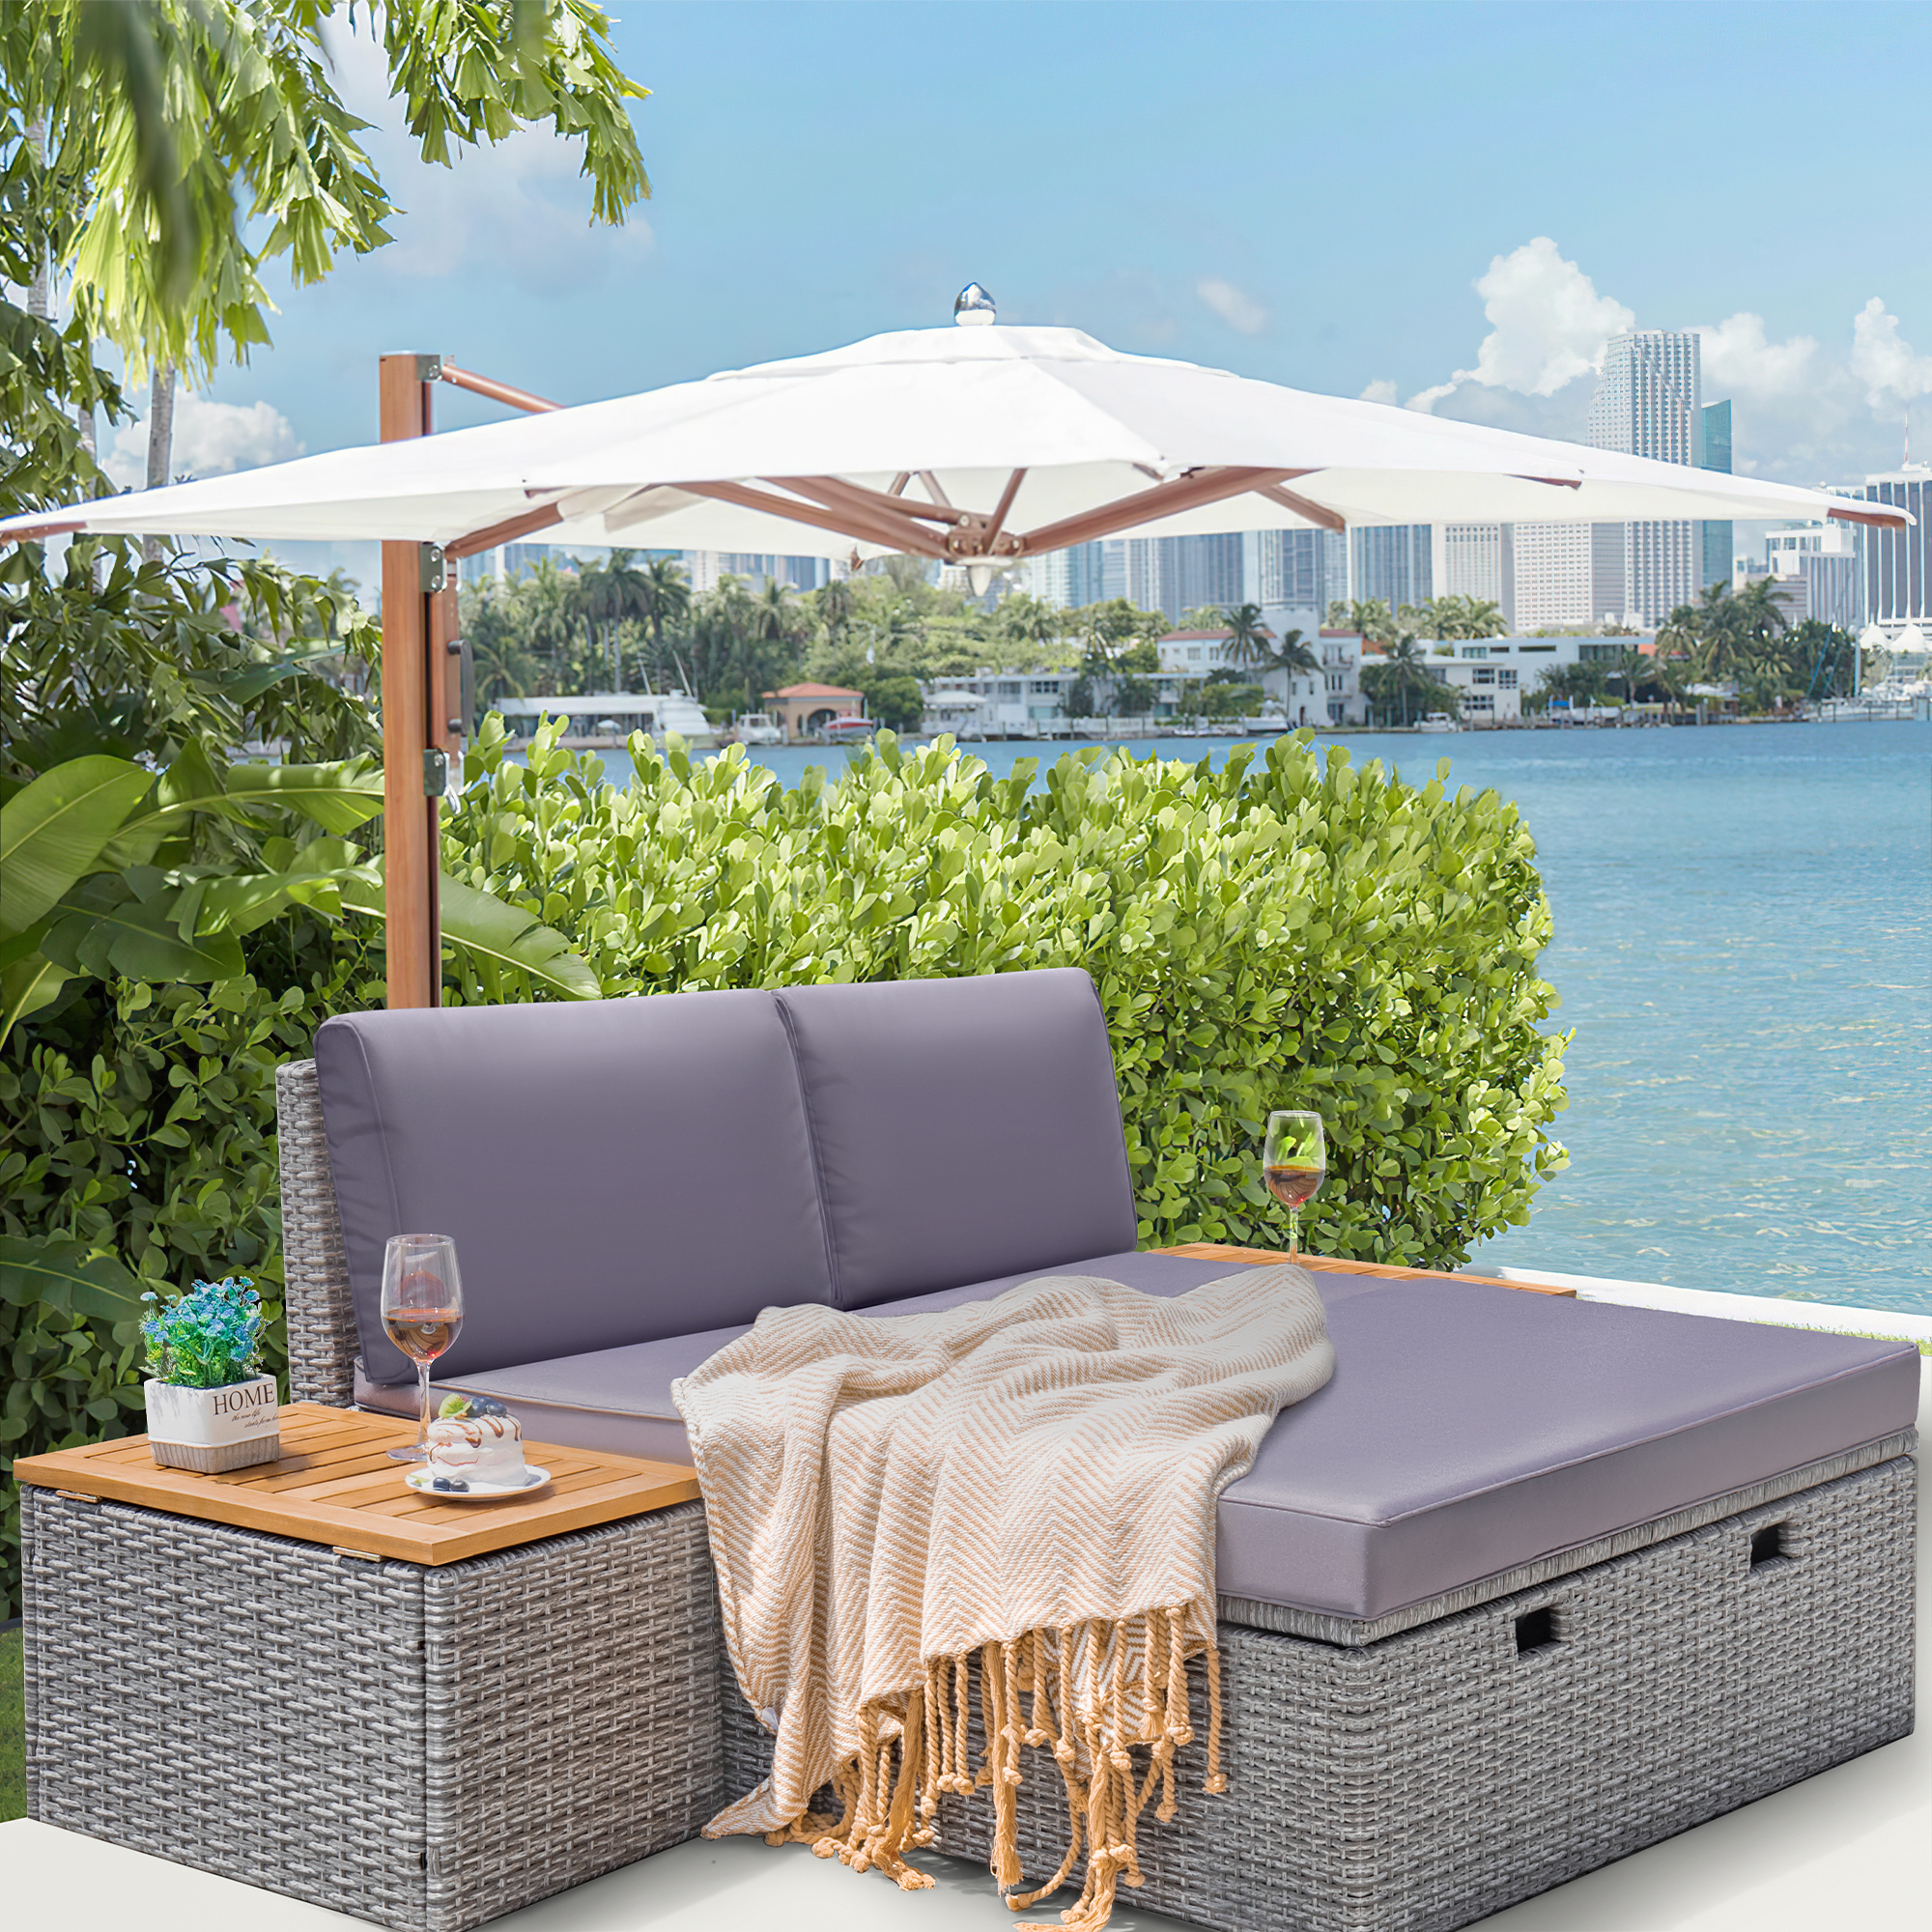 Homall Outdoor Daybed Patio Furniture Set Rattan Storage Daybed with Cushion and Side Table, Gray - image 1 of 8